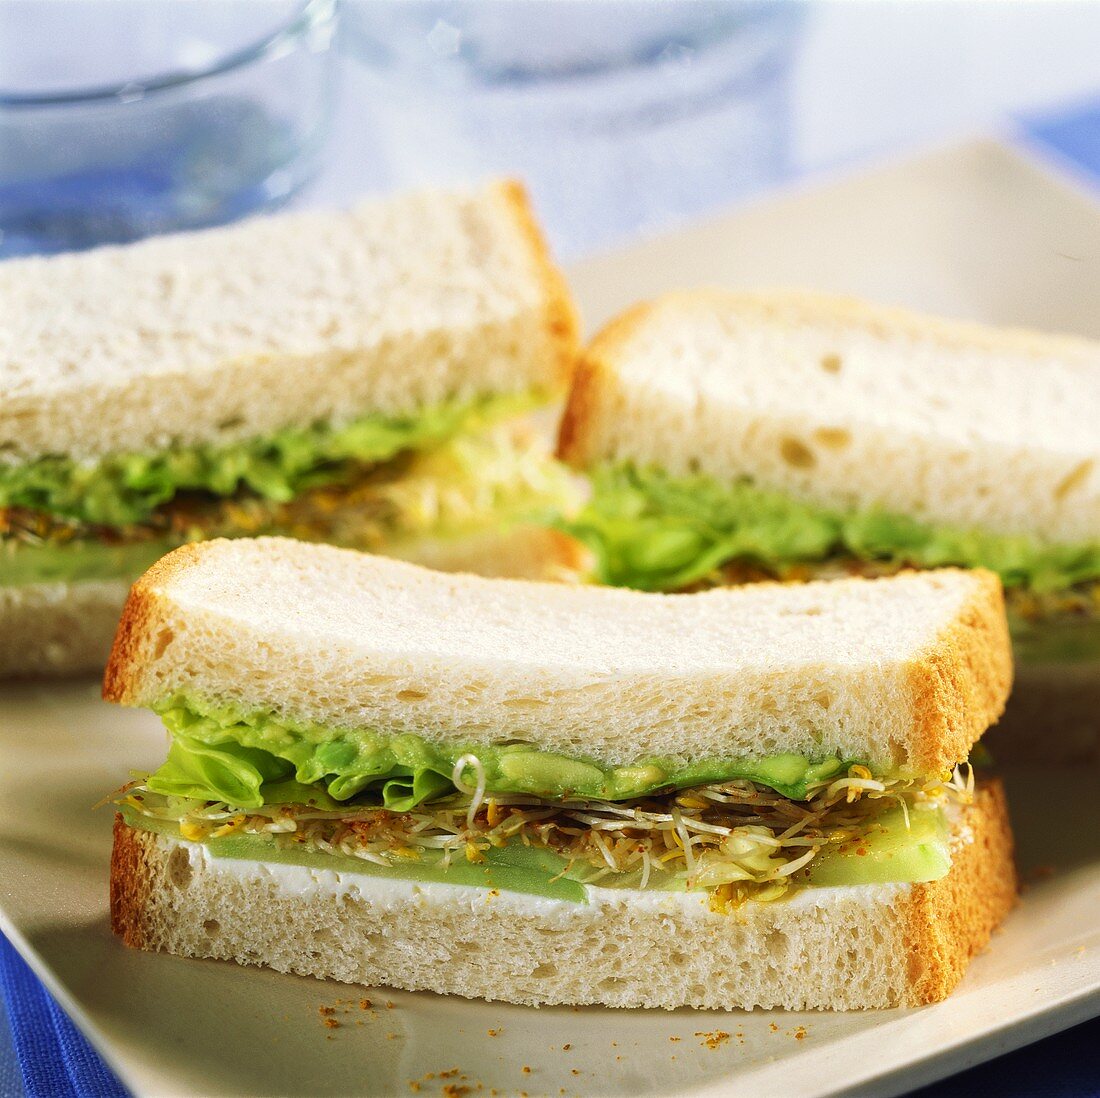 Sandwiches with cucumber and sprouts